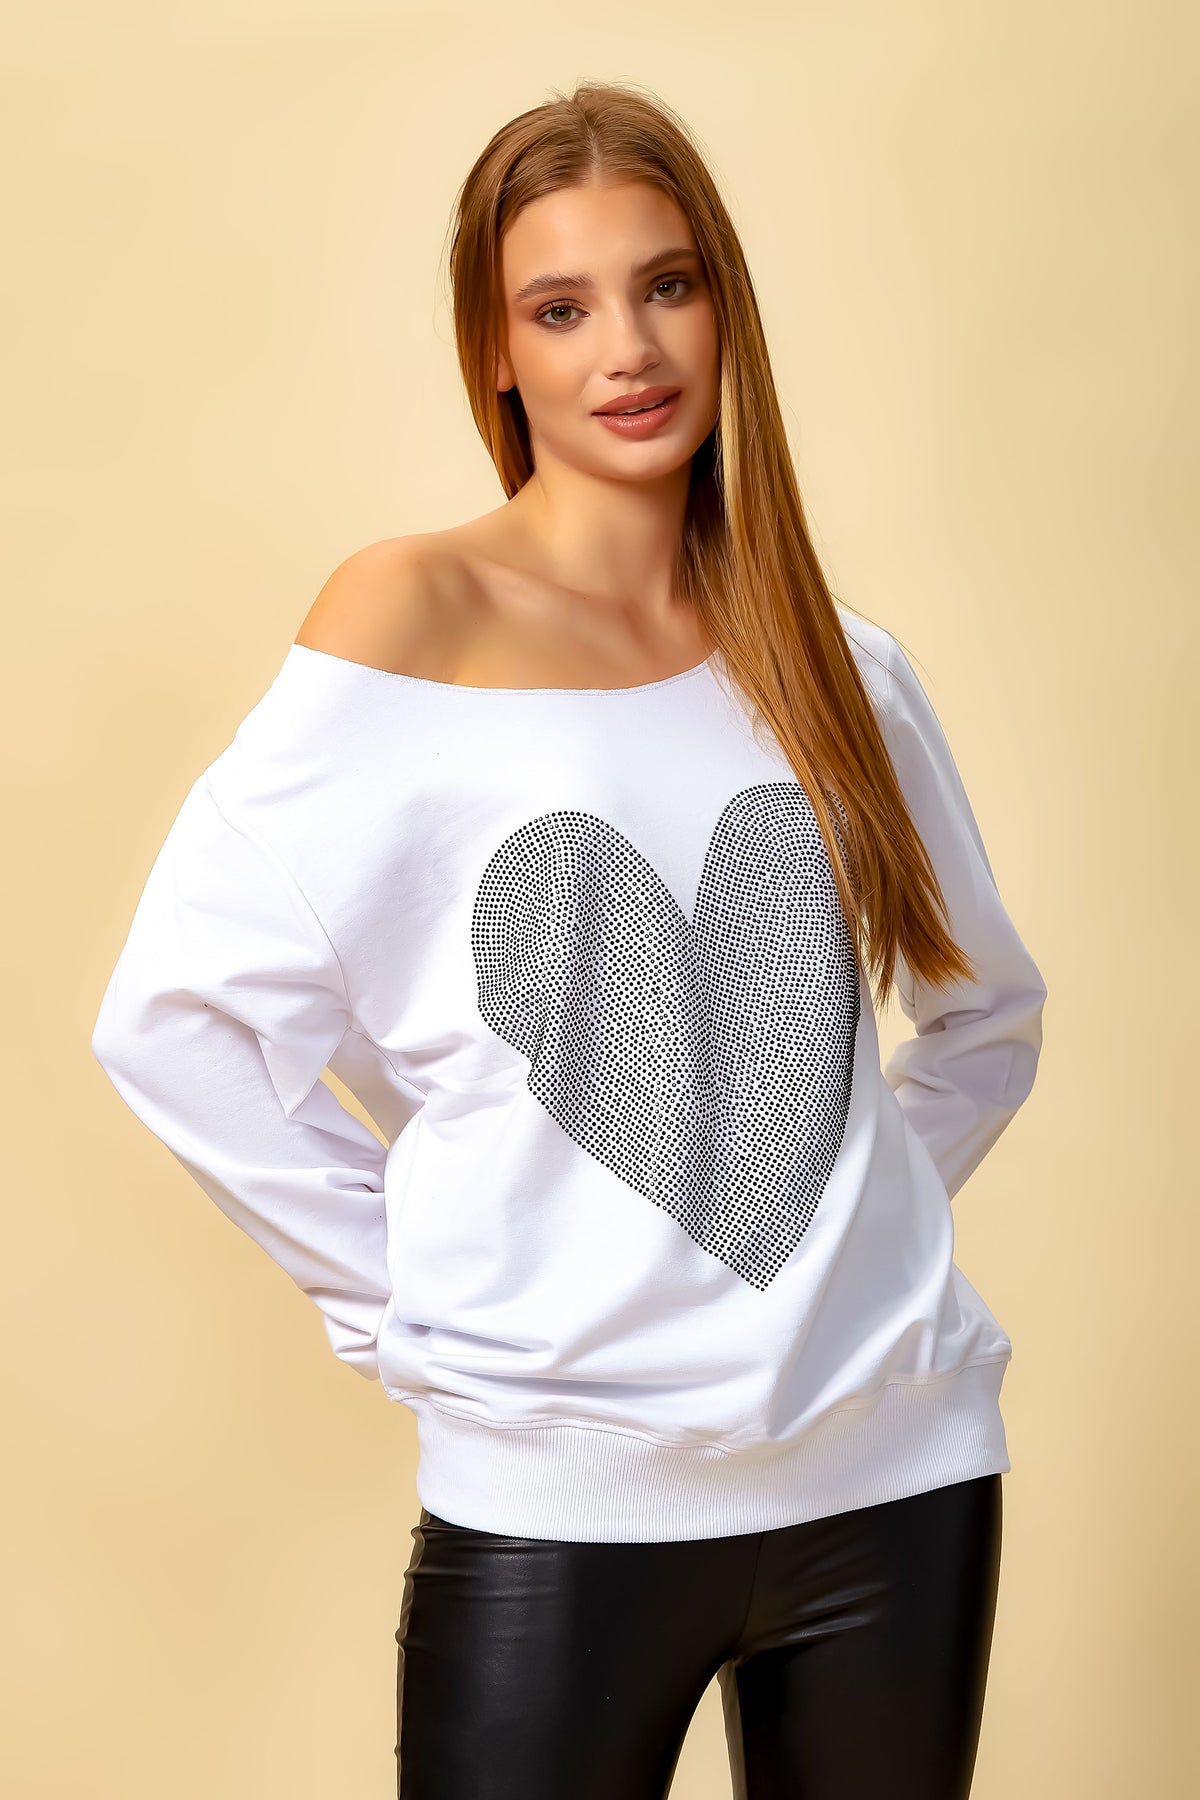 Oversized Fit Long Sleeves Casual Sweatshirts for Women